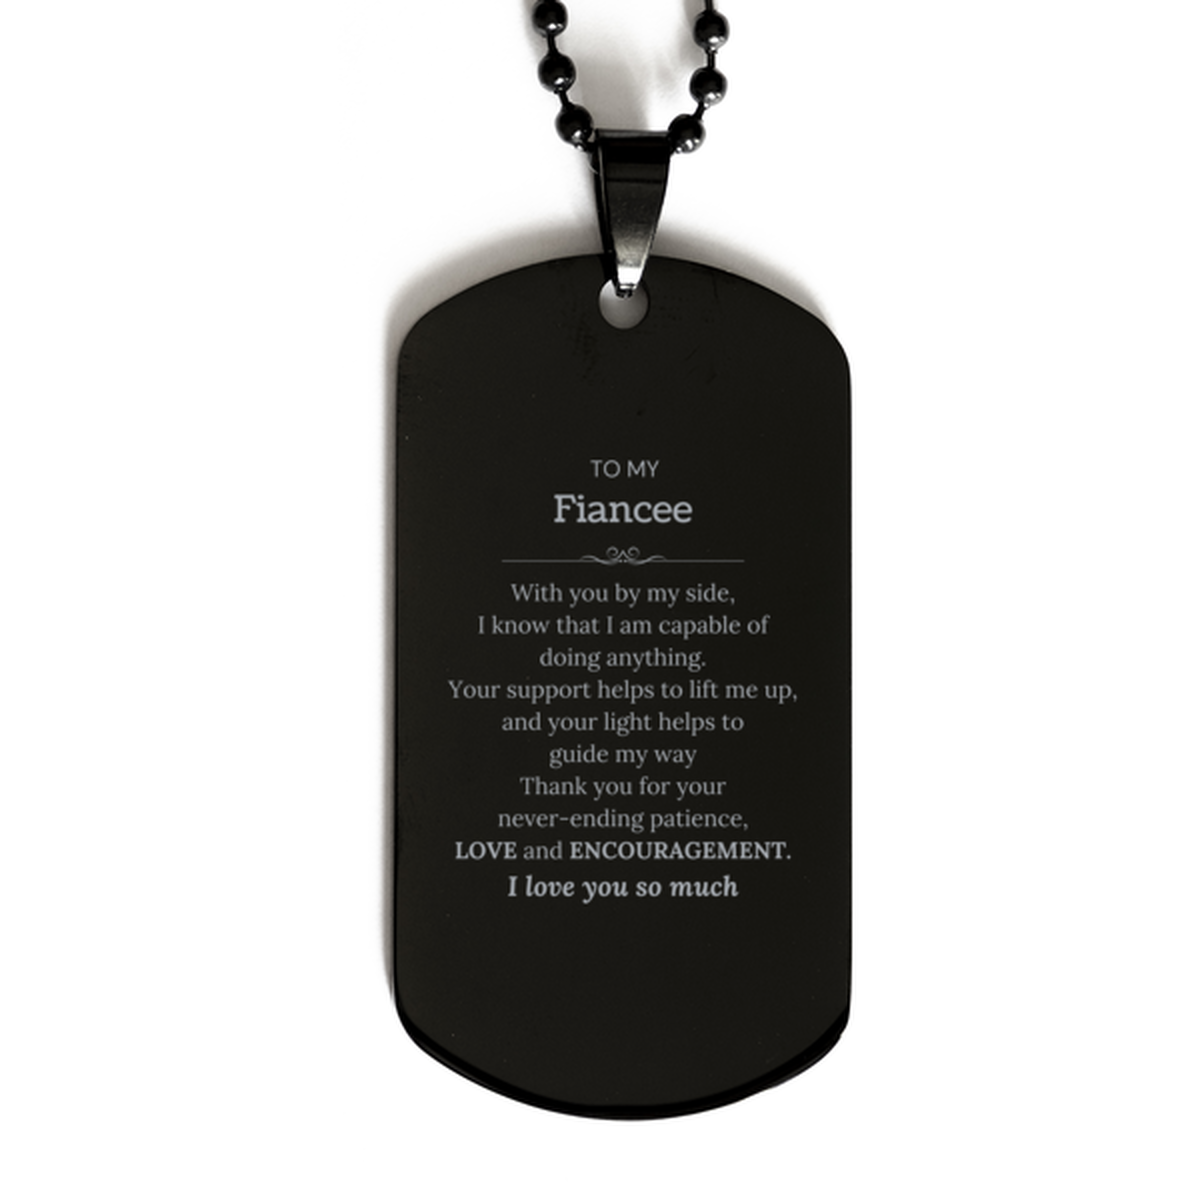 Appreciation Fiancee Black Dog Tag Gifts, To My Fiancee Birthday Christmas Wedding Keepsake Gifts for Fiancee With you by my side, I know that I am capable of doing anything. I love you so much